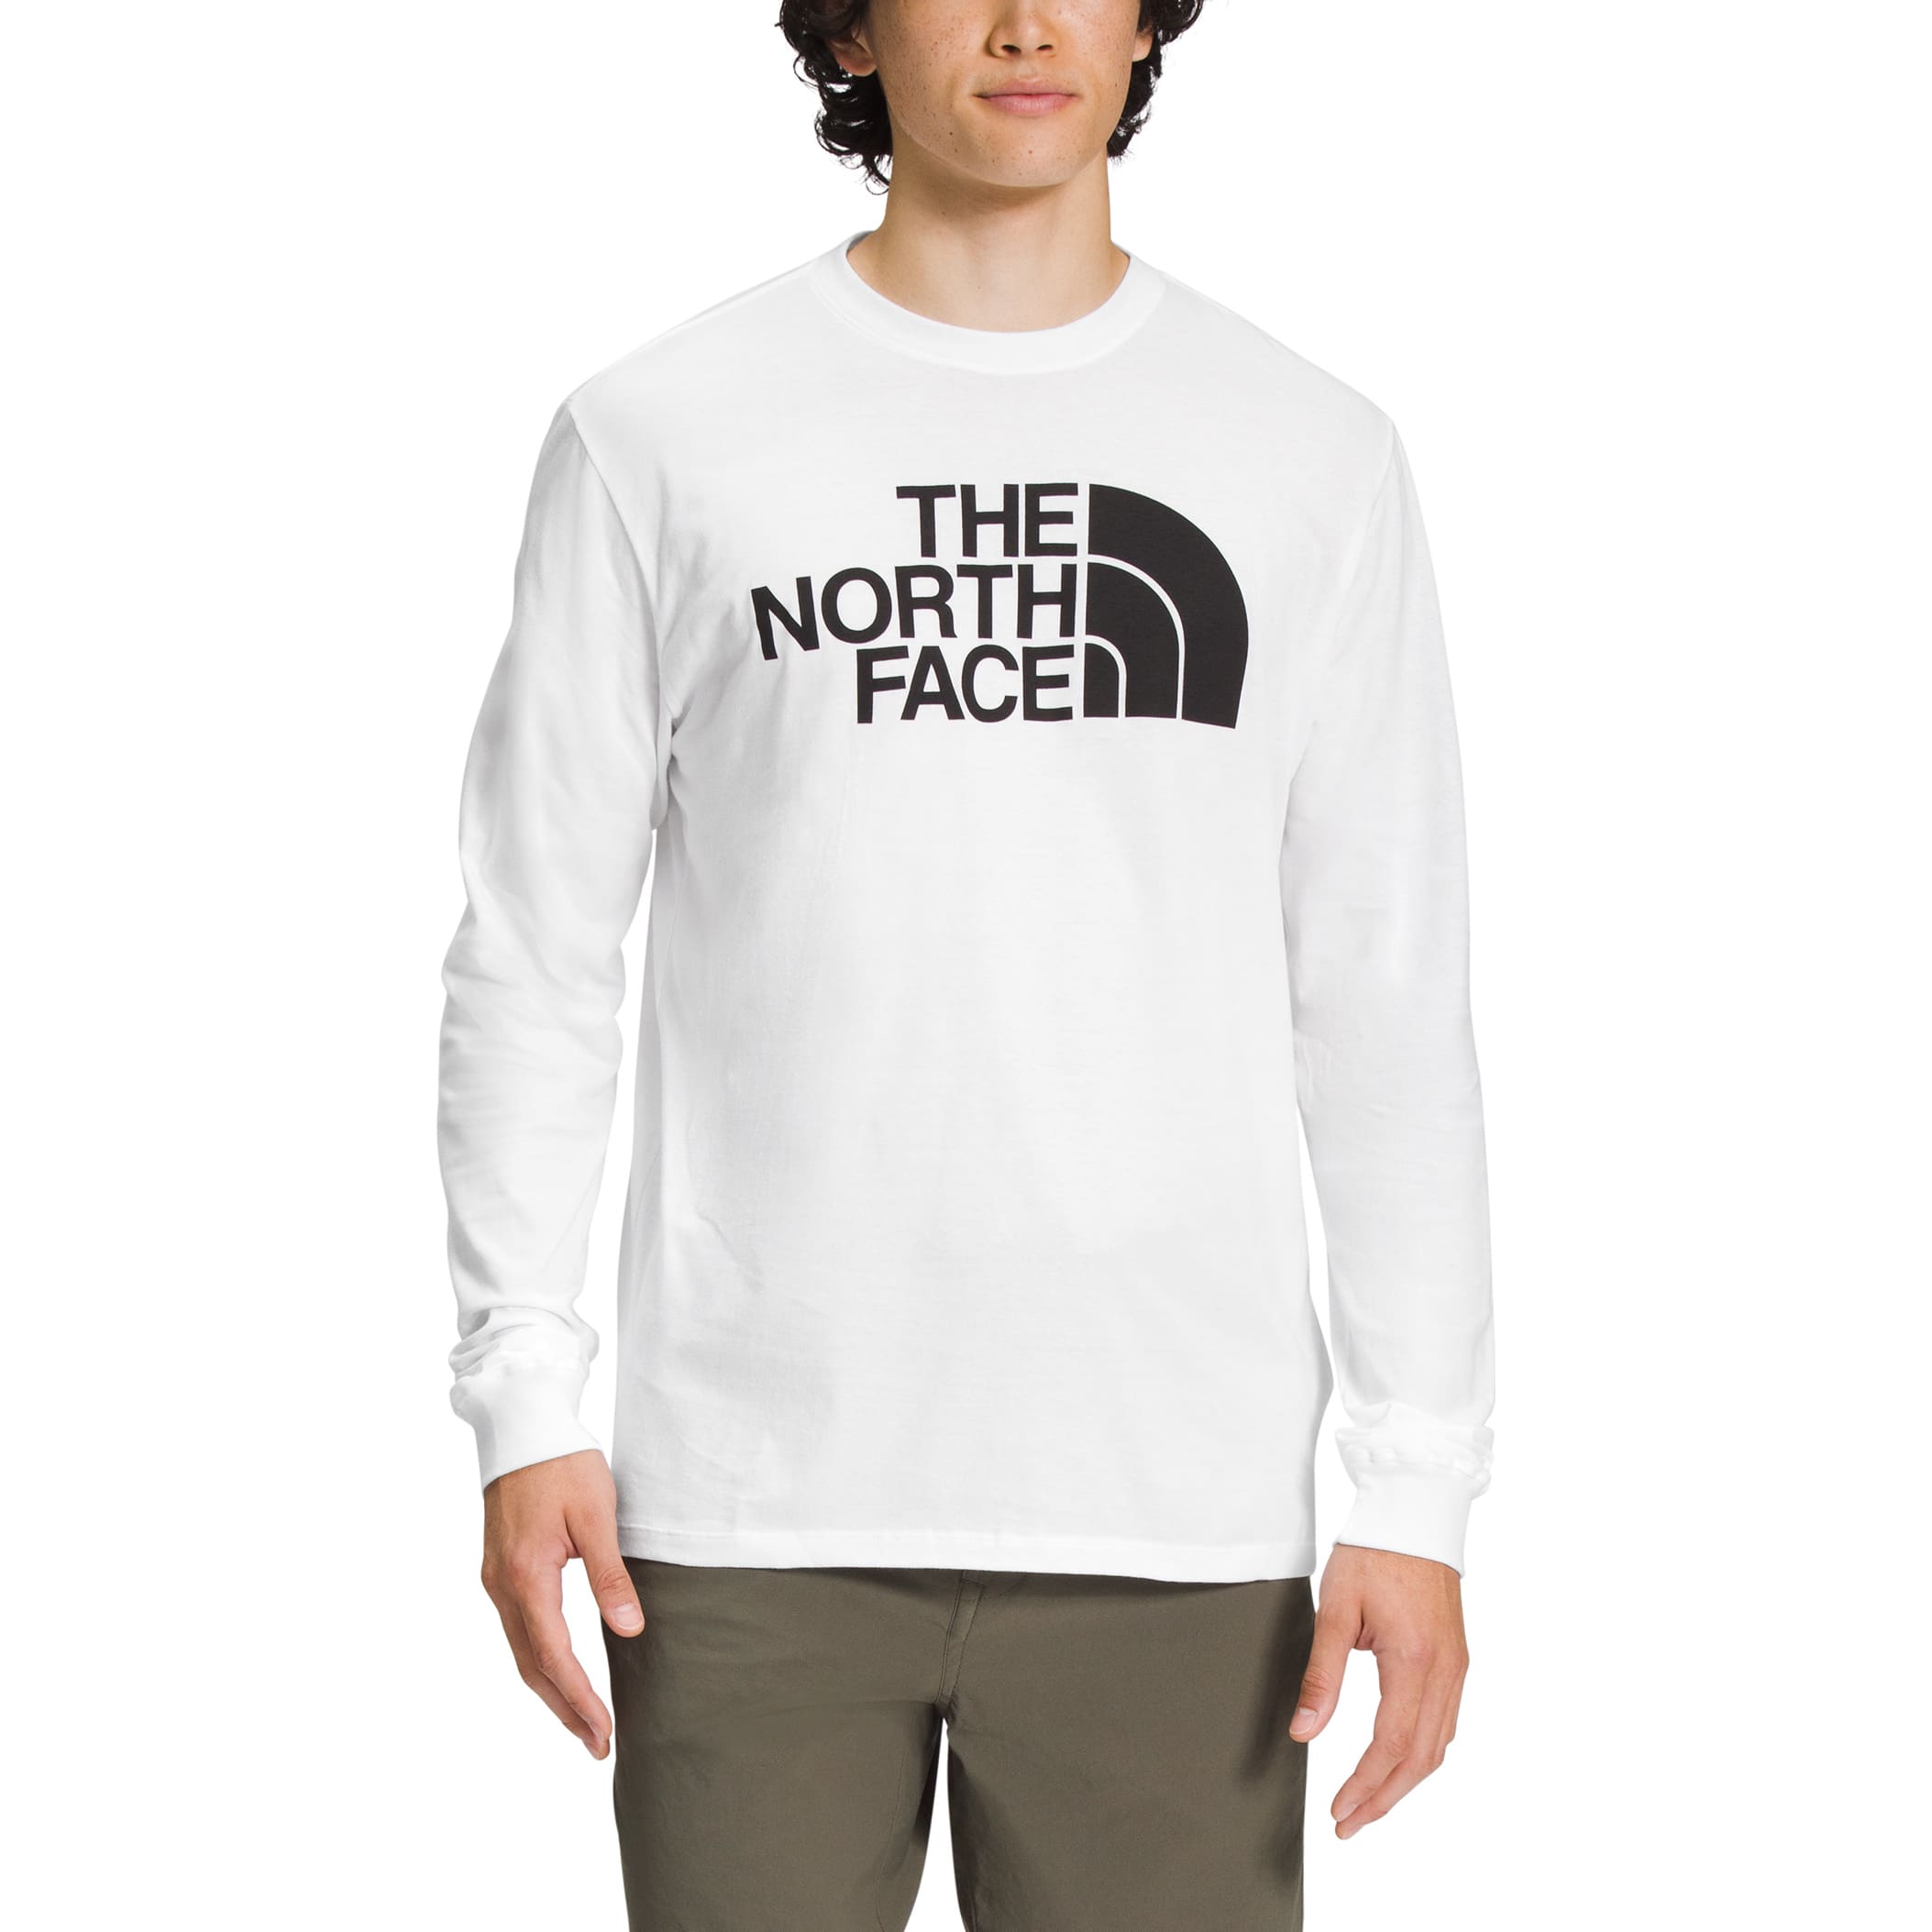 The North Face® Men’s Long-Sleeve Half Dome T-Shirt